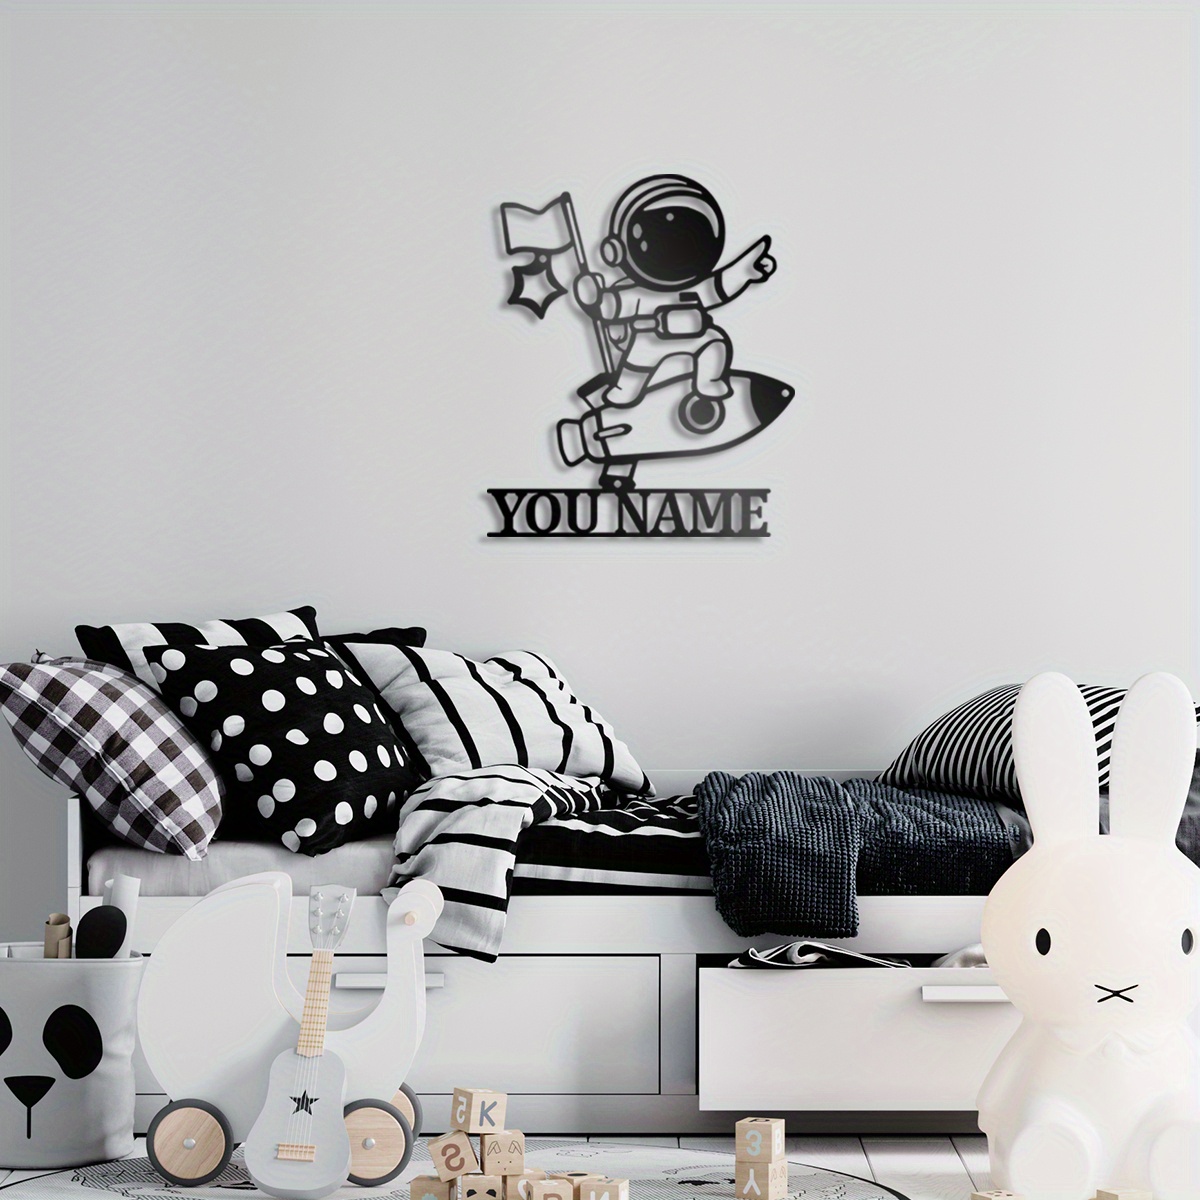 

Custom Space Astronaut Metal Wall Art - Personalized Boy On Rocket Name Sign For Home Decor, Perfect Gift Idea Astronaut Decor